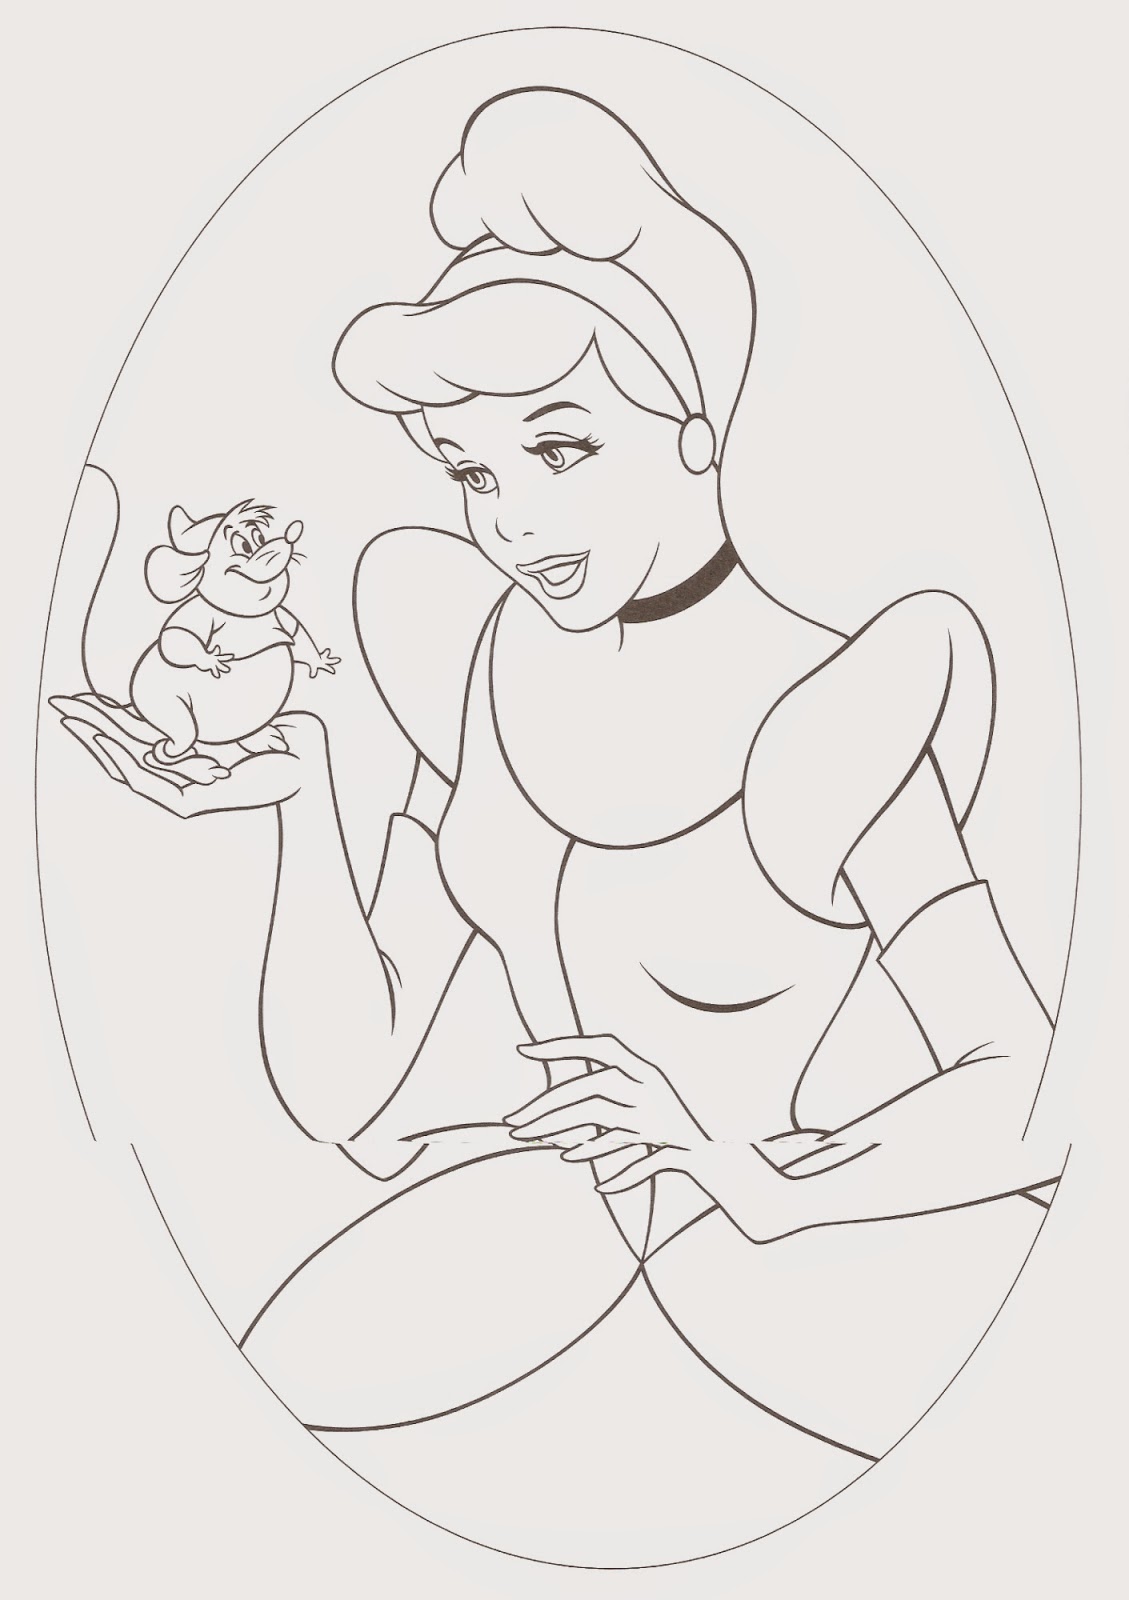 Coloring Pages: Cinderella Free Printable Coloring Pages